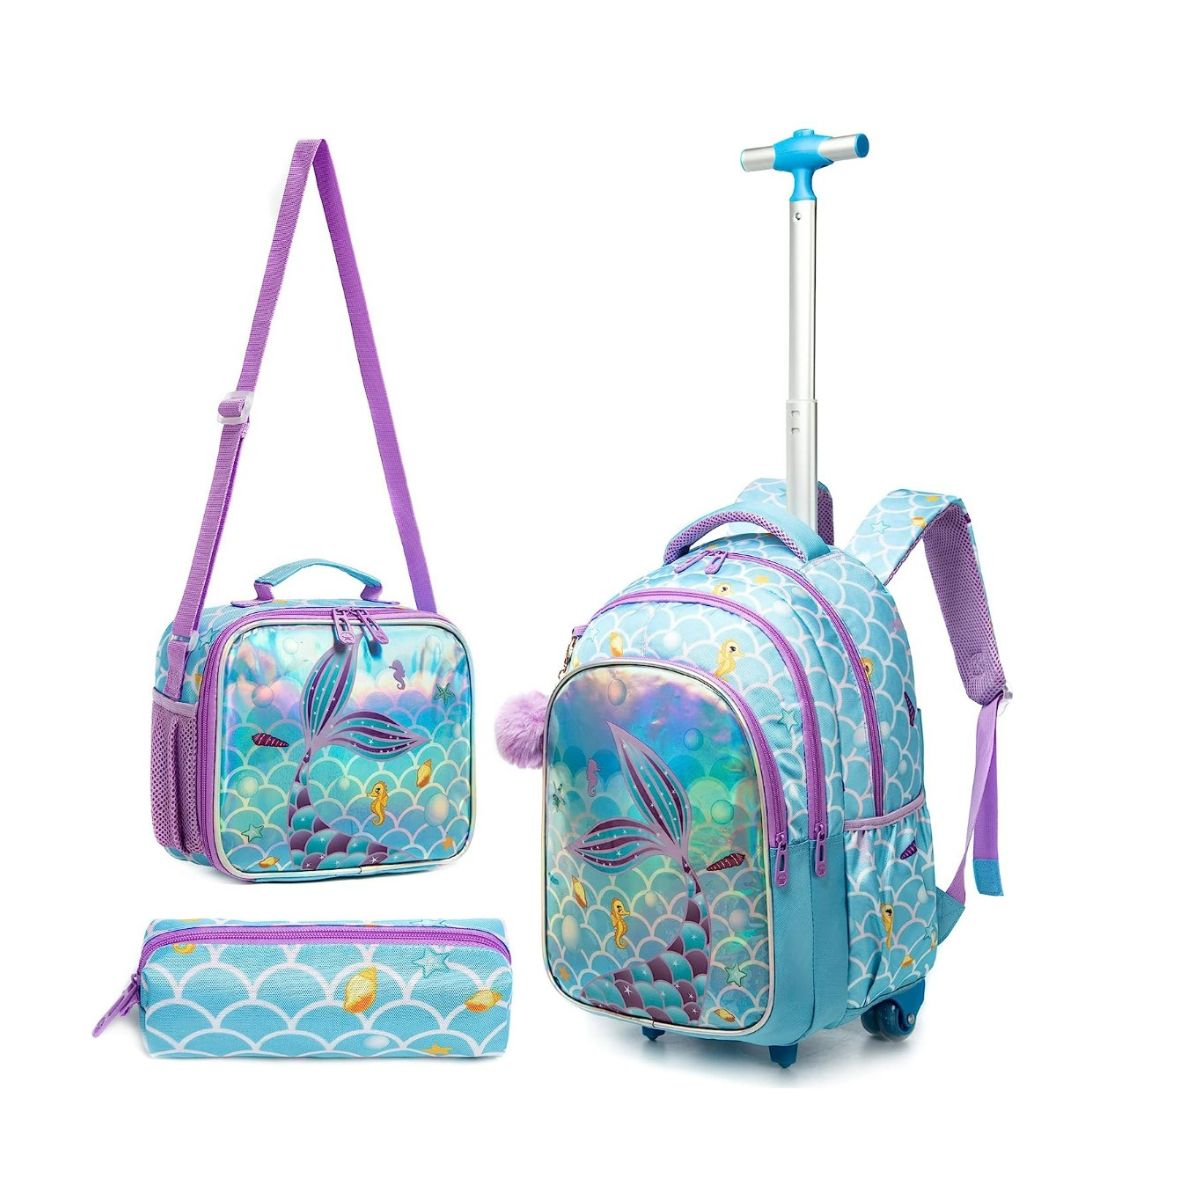 Mermaid large backpack on wheels for kids with matching mermaid lunch box and pencil pouch.